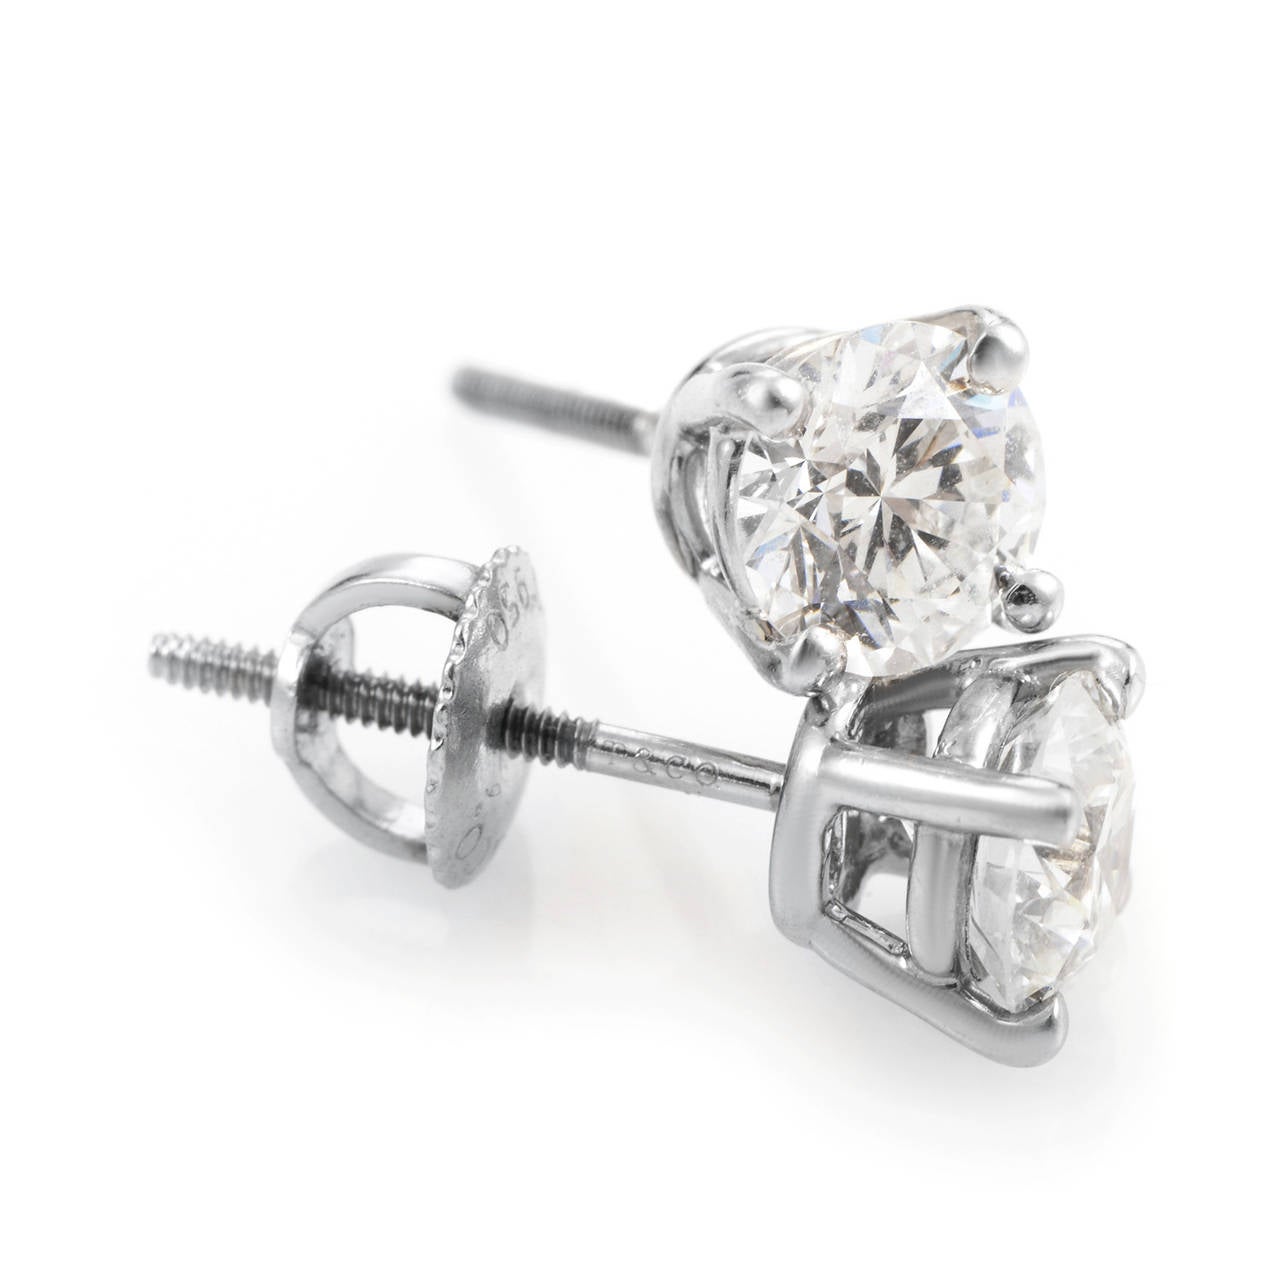 Boasting a pair of astonishing H-color VS1 and VS2 brilliant-cut diamonds, weighing 0.74ct and 0.75ct respectively, these glamorous platinum earrings from Tiffany & Co. exude sophisticated elegance and offer a sublime luxurious look.
Included